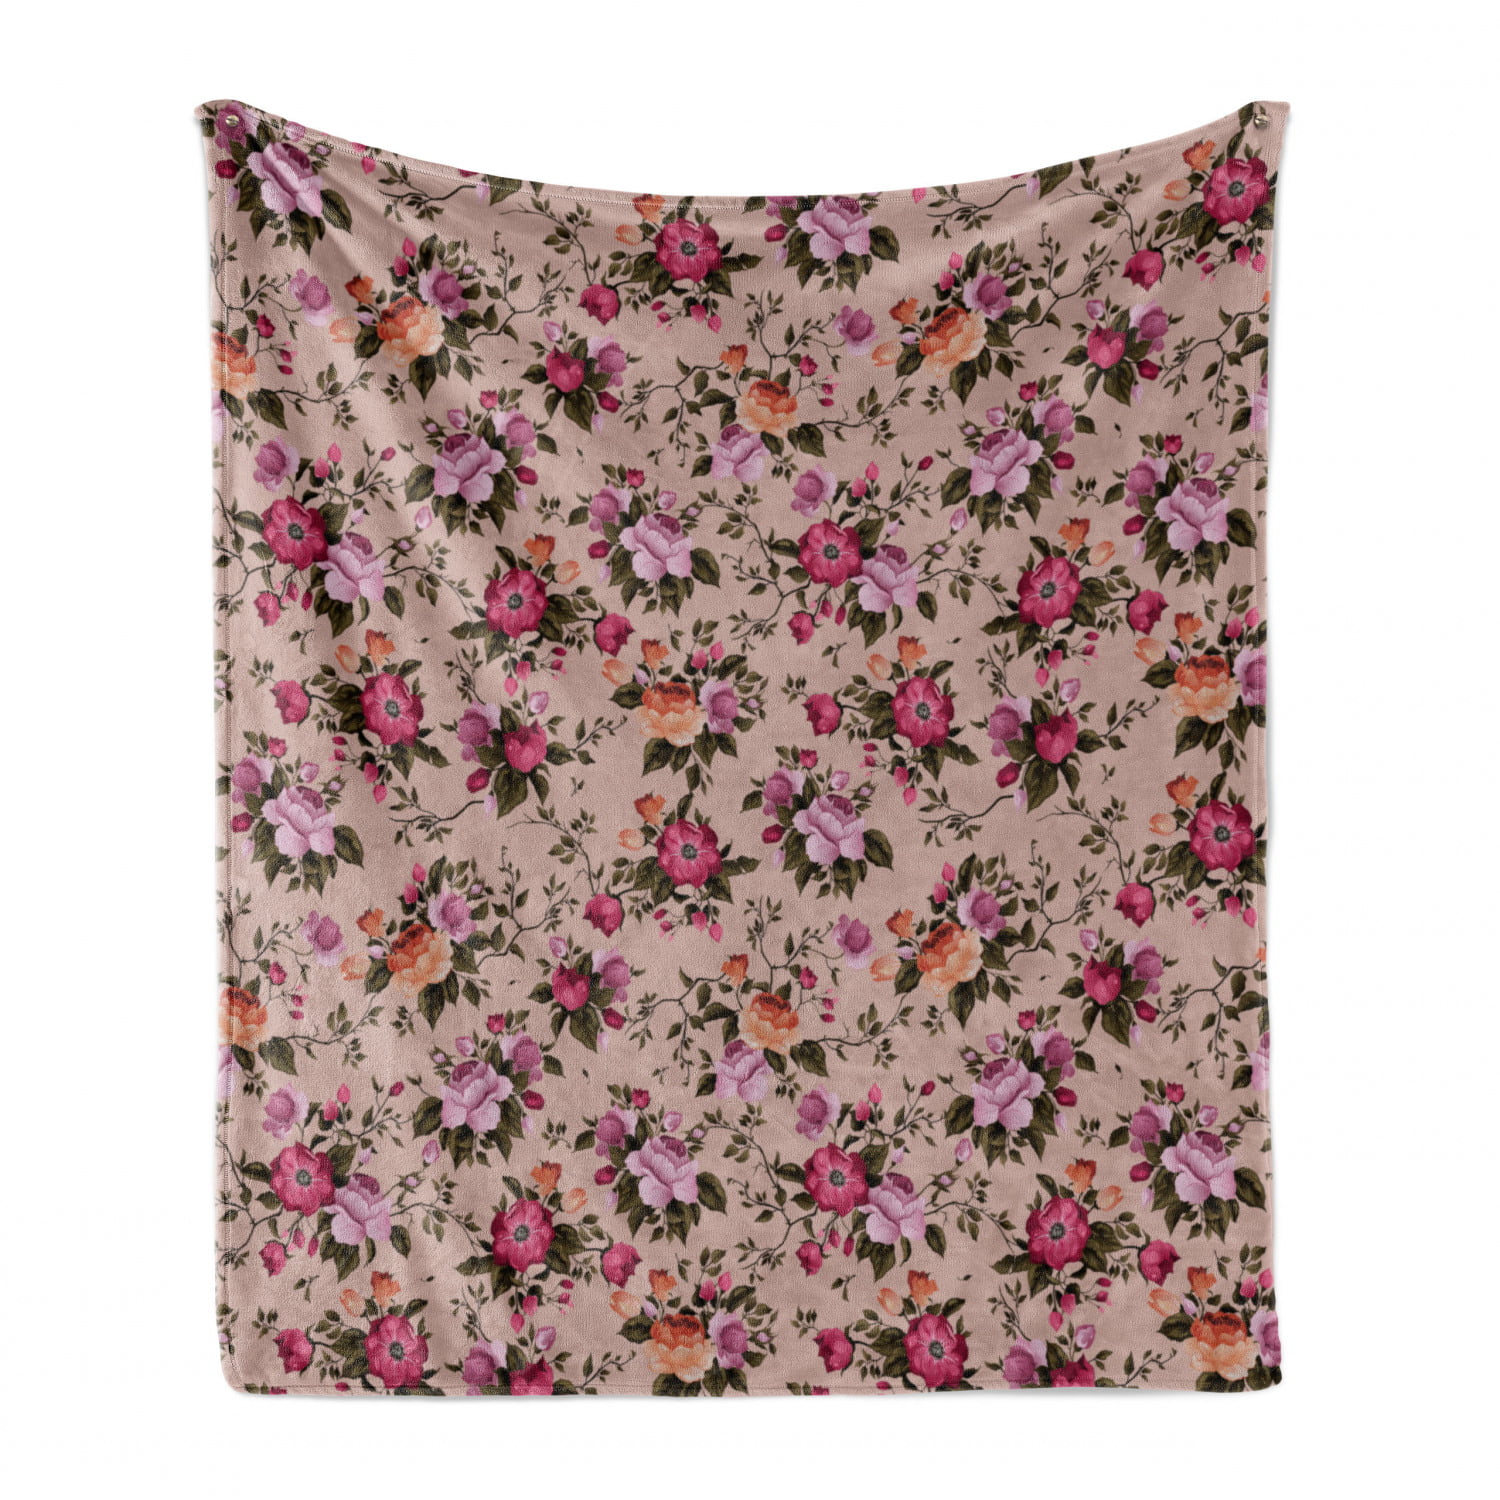 Rose Pale Orange Print of Pastel Pink Tones Roses Butterflies Romantic Design Composition 60 x 80 Ambesonne Landscape Soft Flannel Fleece Throw Blanket Cozy Plush for Indoor and Outdoor Use